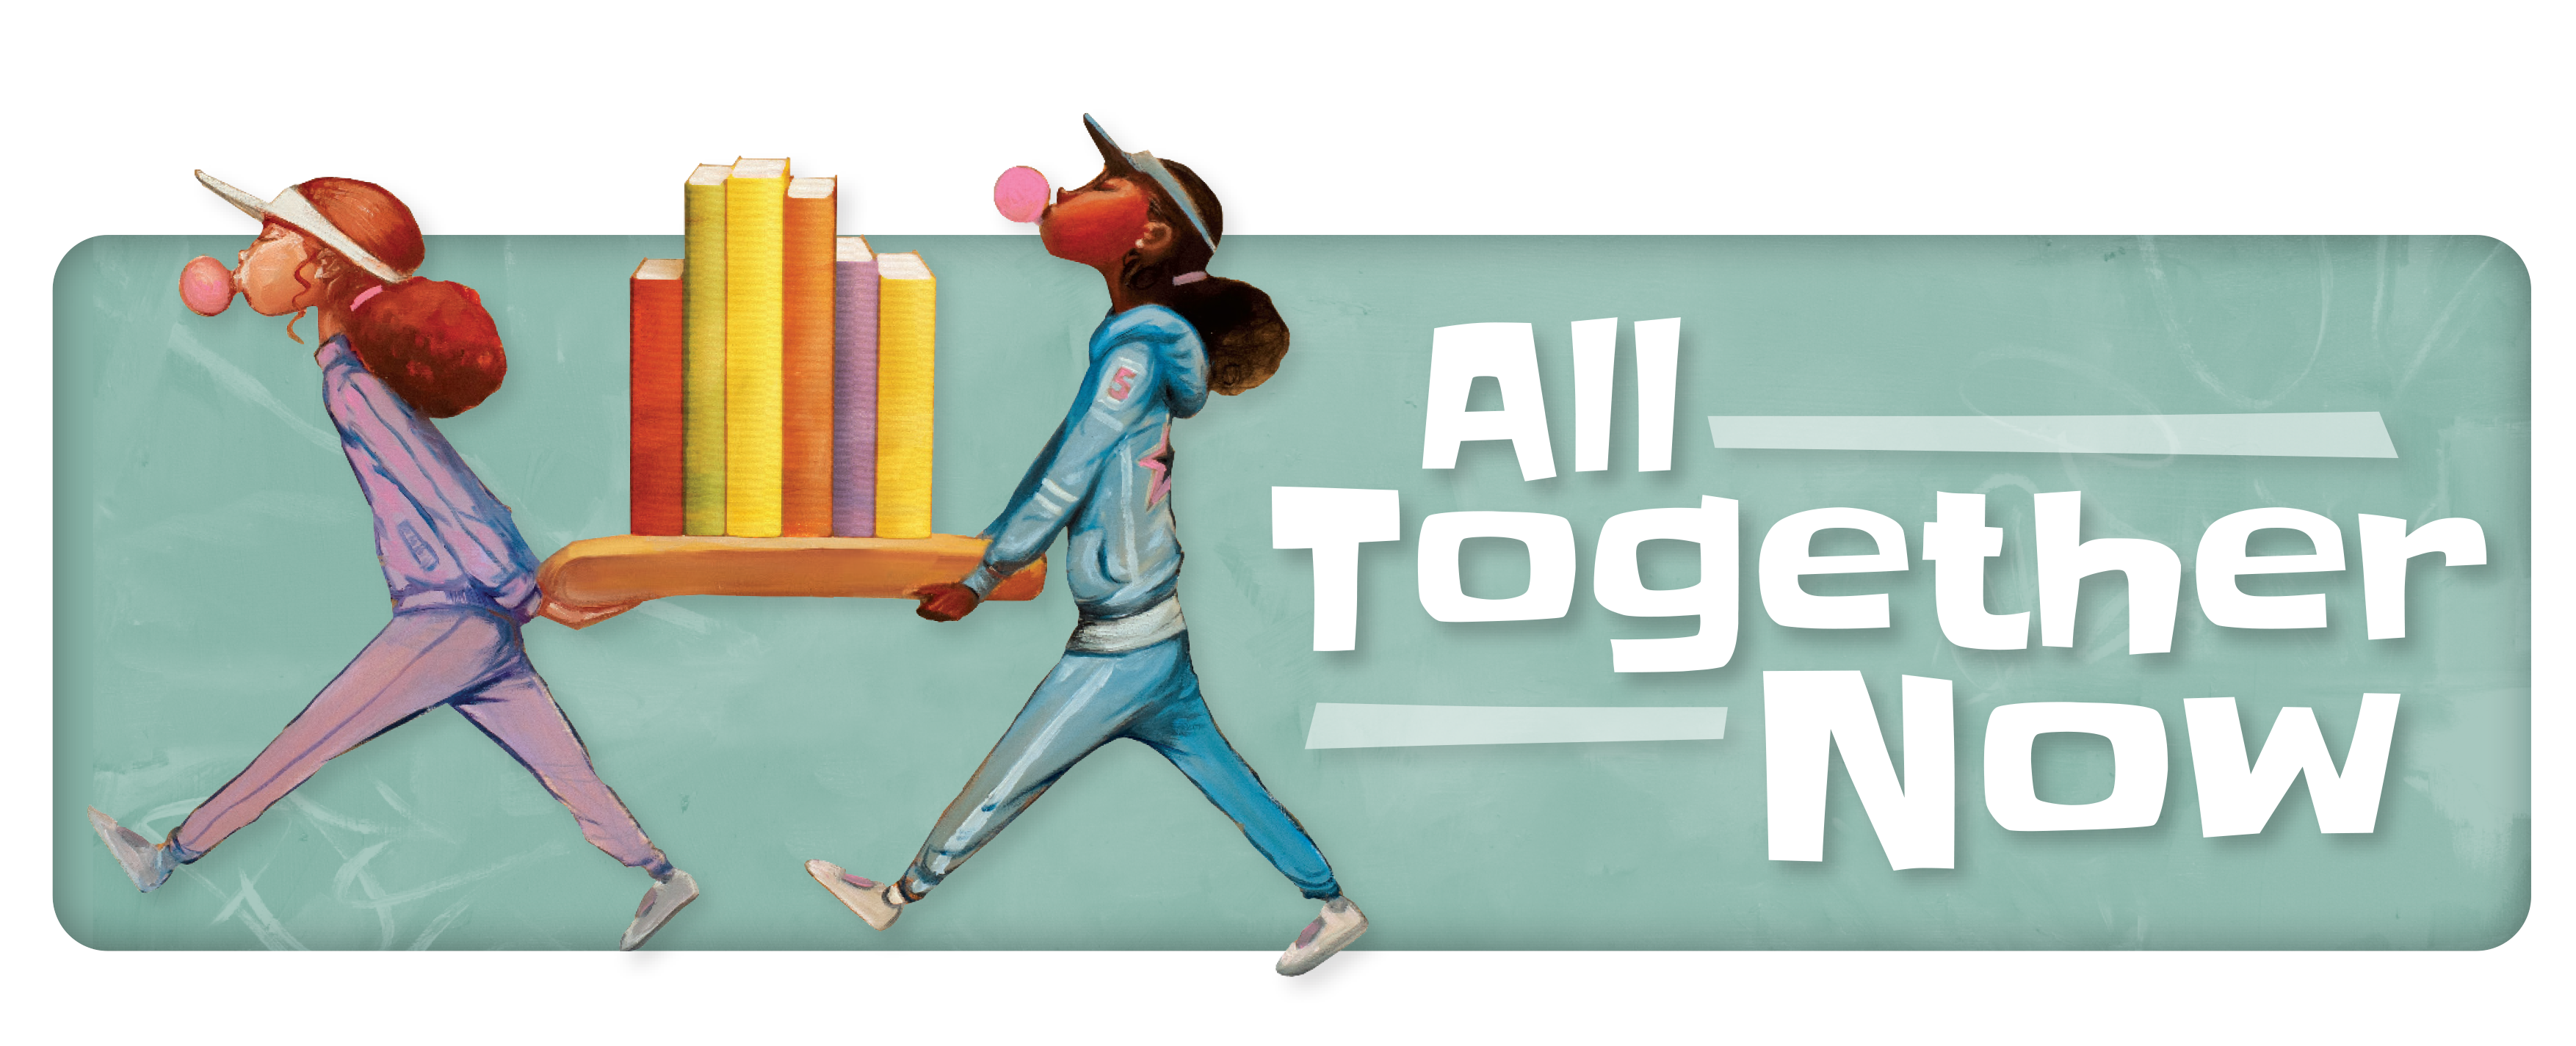 All together now logo image